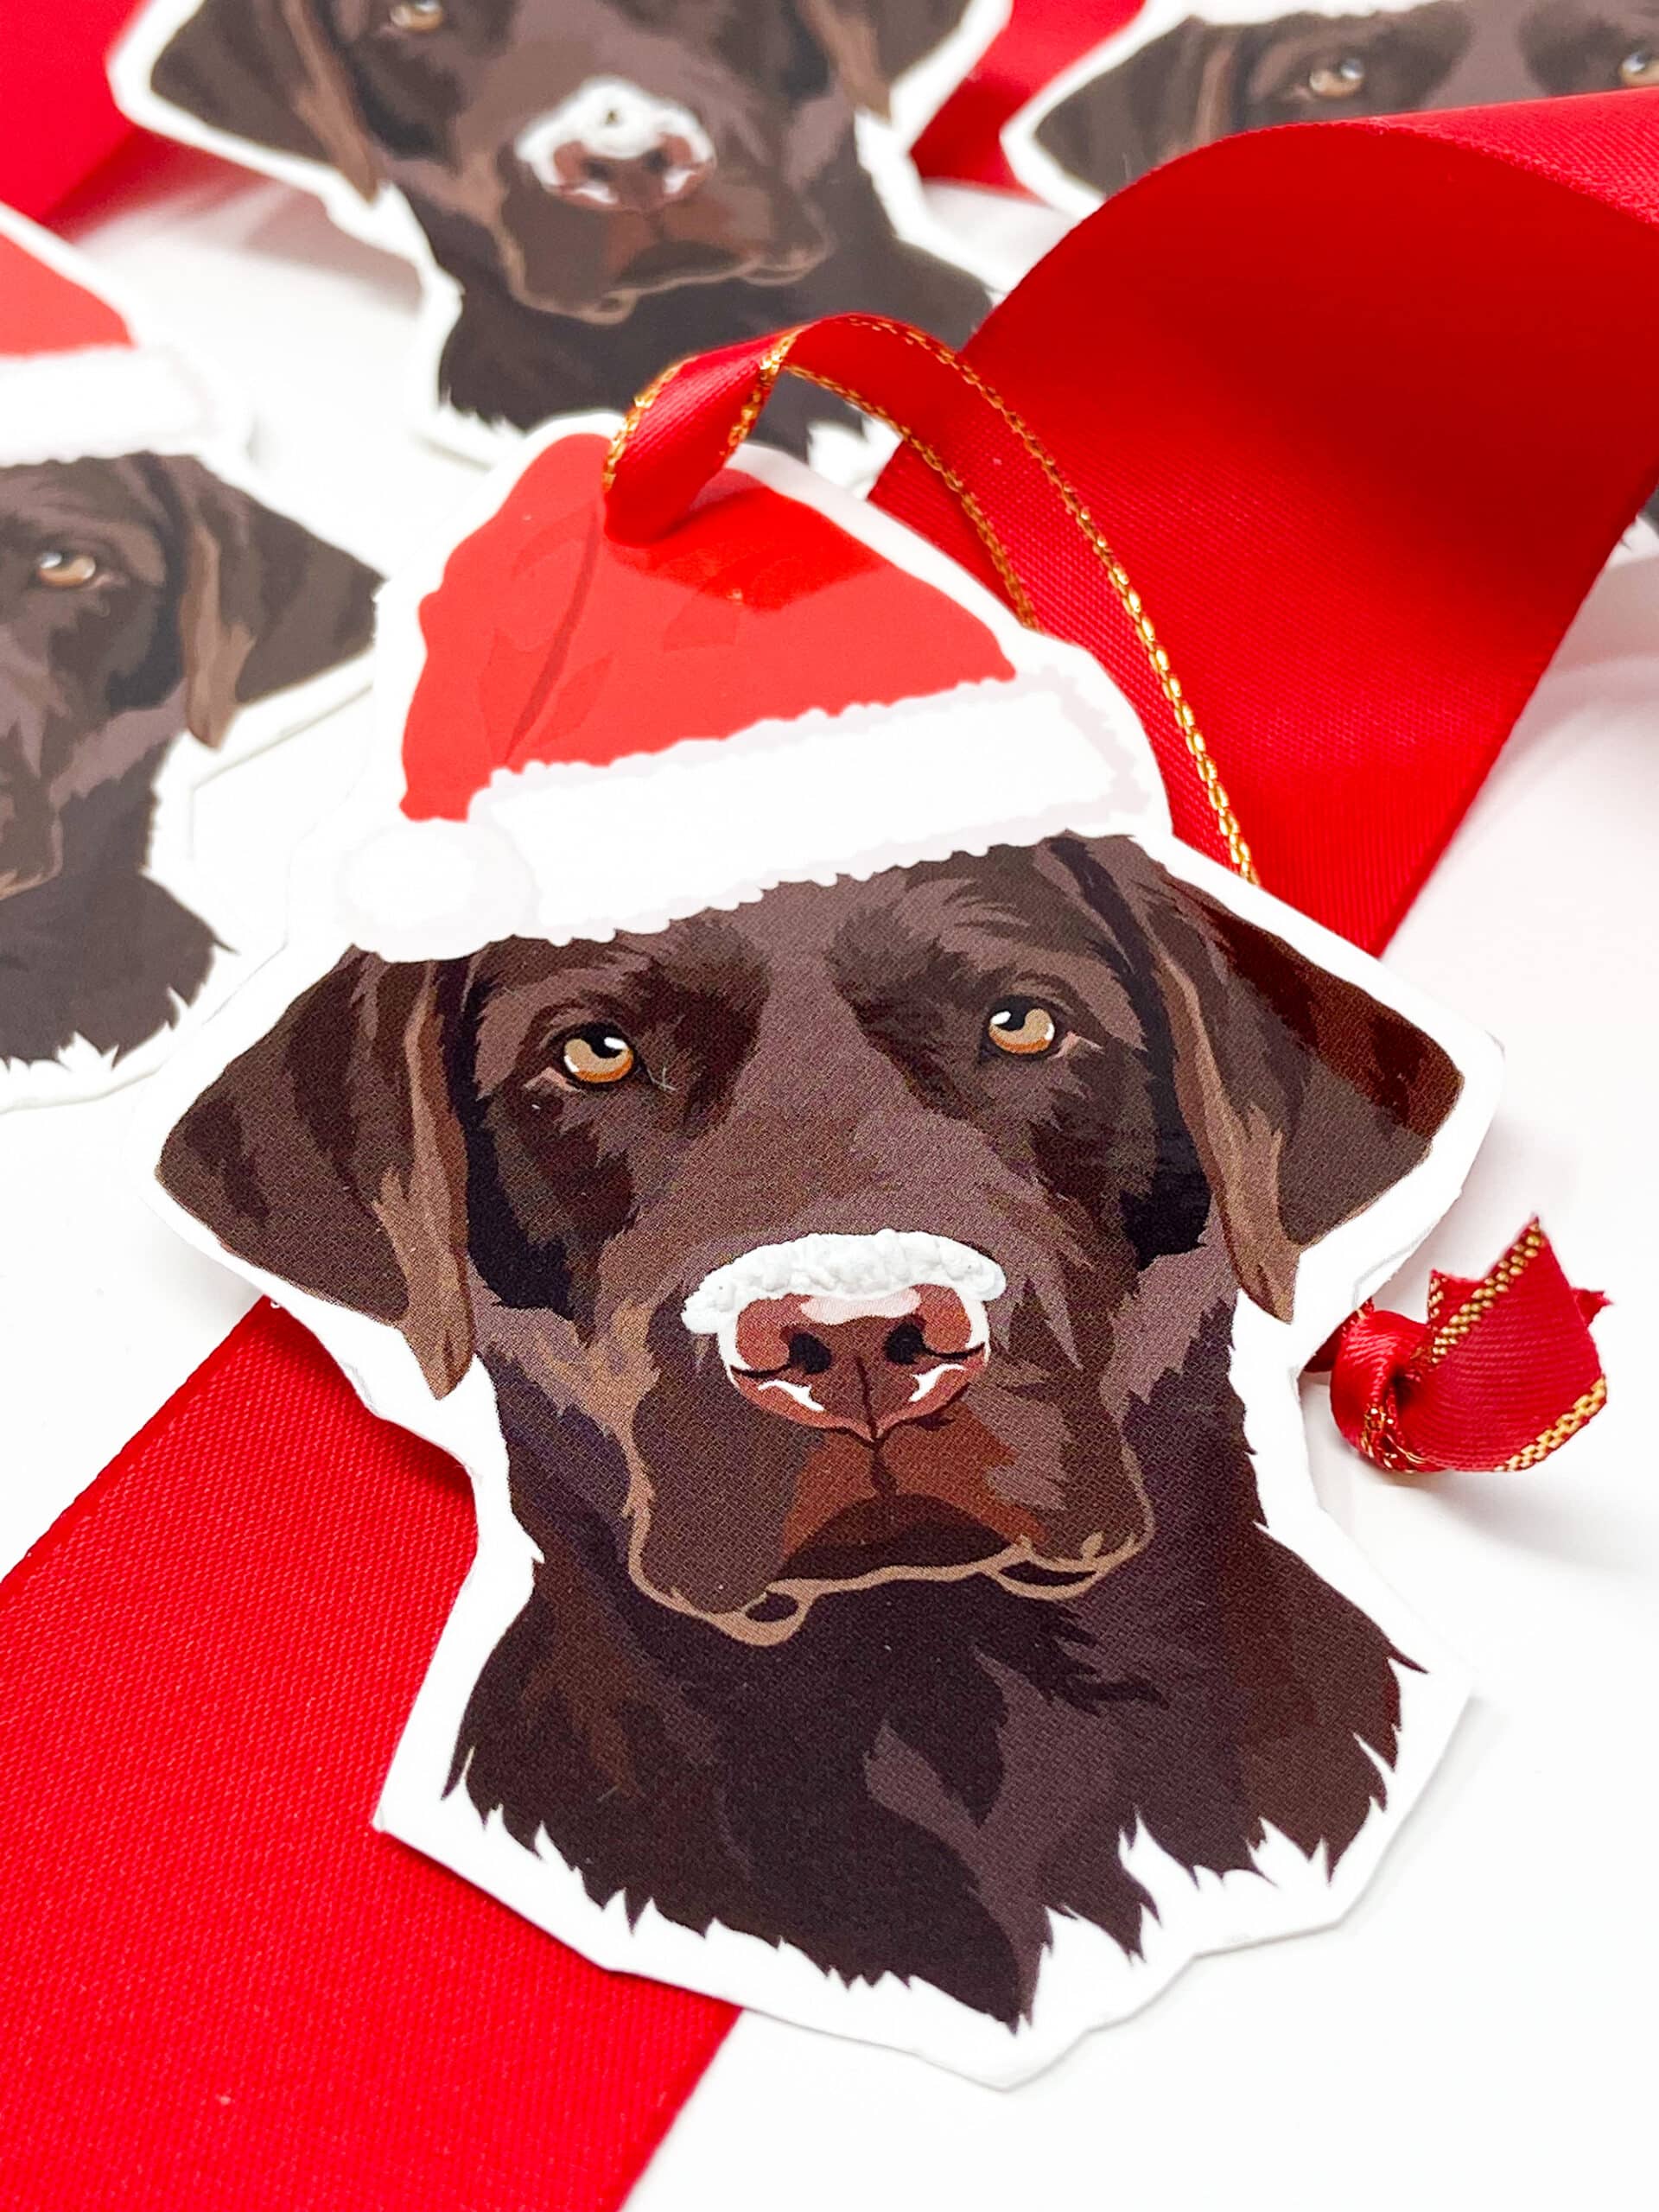 EXPLORING FRESH SNOW Brown Labrador Gift Tags - These beautiful gift tags feature the beloved chocolate Labrador retriever sporting a festive Santa hat and a light dusting of snow on his nose! The snow has 3D effect on the tags for added effect. Perfect for animal lovers of all kinds! ABOUT OUR TAGS These tags are made in the USA with heavyweight card stock and premium satin ribbon. Aside from printing, our gift tags are hand made and may have some slight inconsistencies between pieces, such as exact length of ribbon. These tags are made exclusively for Kenzies of London and are not found anywhere else. While they can be used as gift tags, they make wonderful paper ornaments and can be used for crafting and display purposes. BROWN LABRADOR GIFT TAGS SPECS Set of 6 Gift Tags Measures approximately 3x2.5" Printed on heavyweight card stock paper Tied with premium satin ribbon